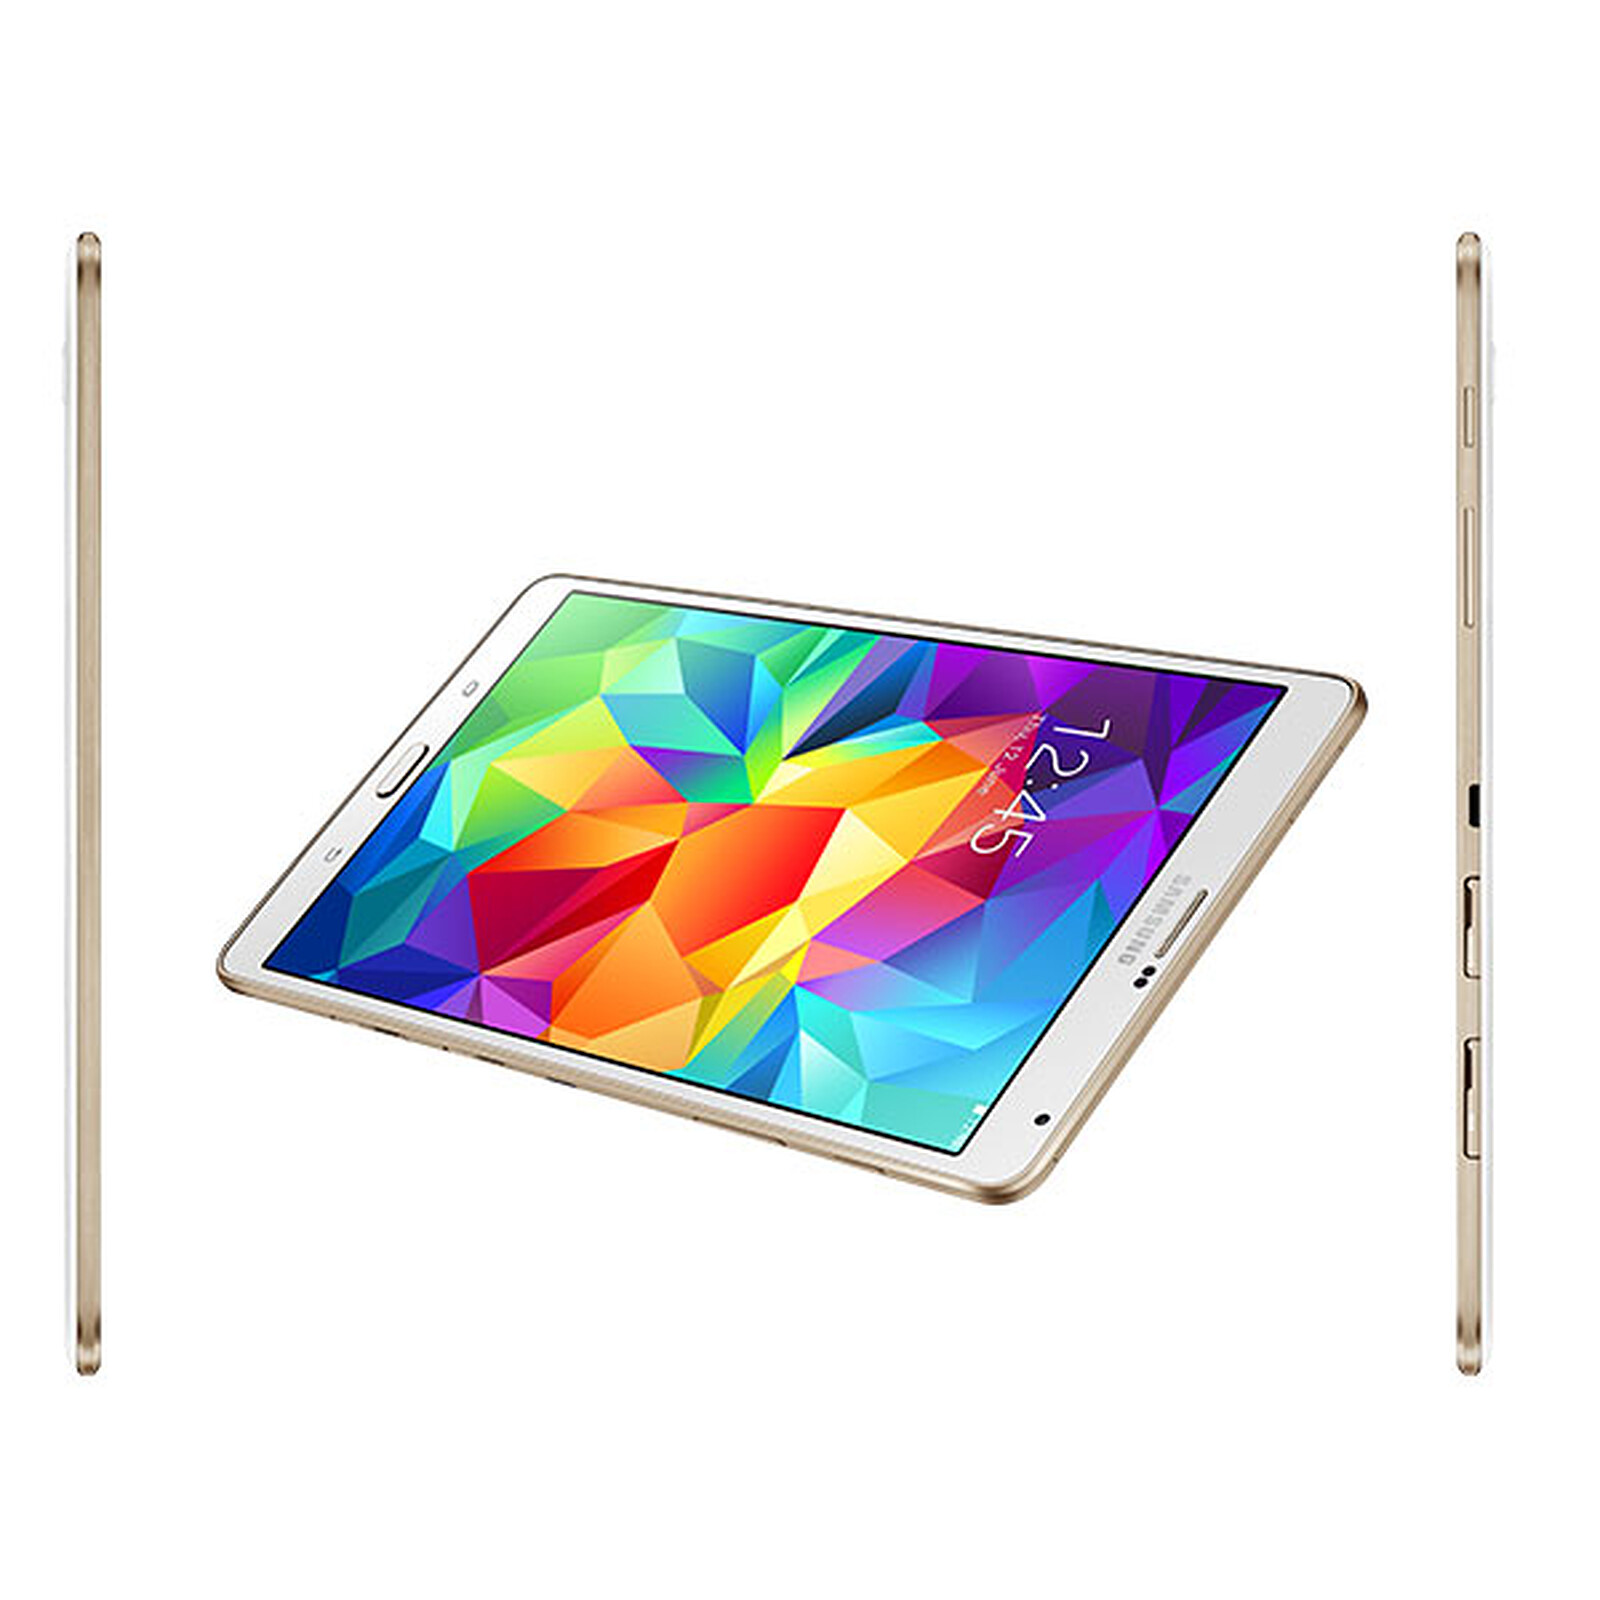 Galaxy Tab : tablette Samsung 10.1 pouces 16 Go Android pas cher